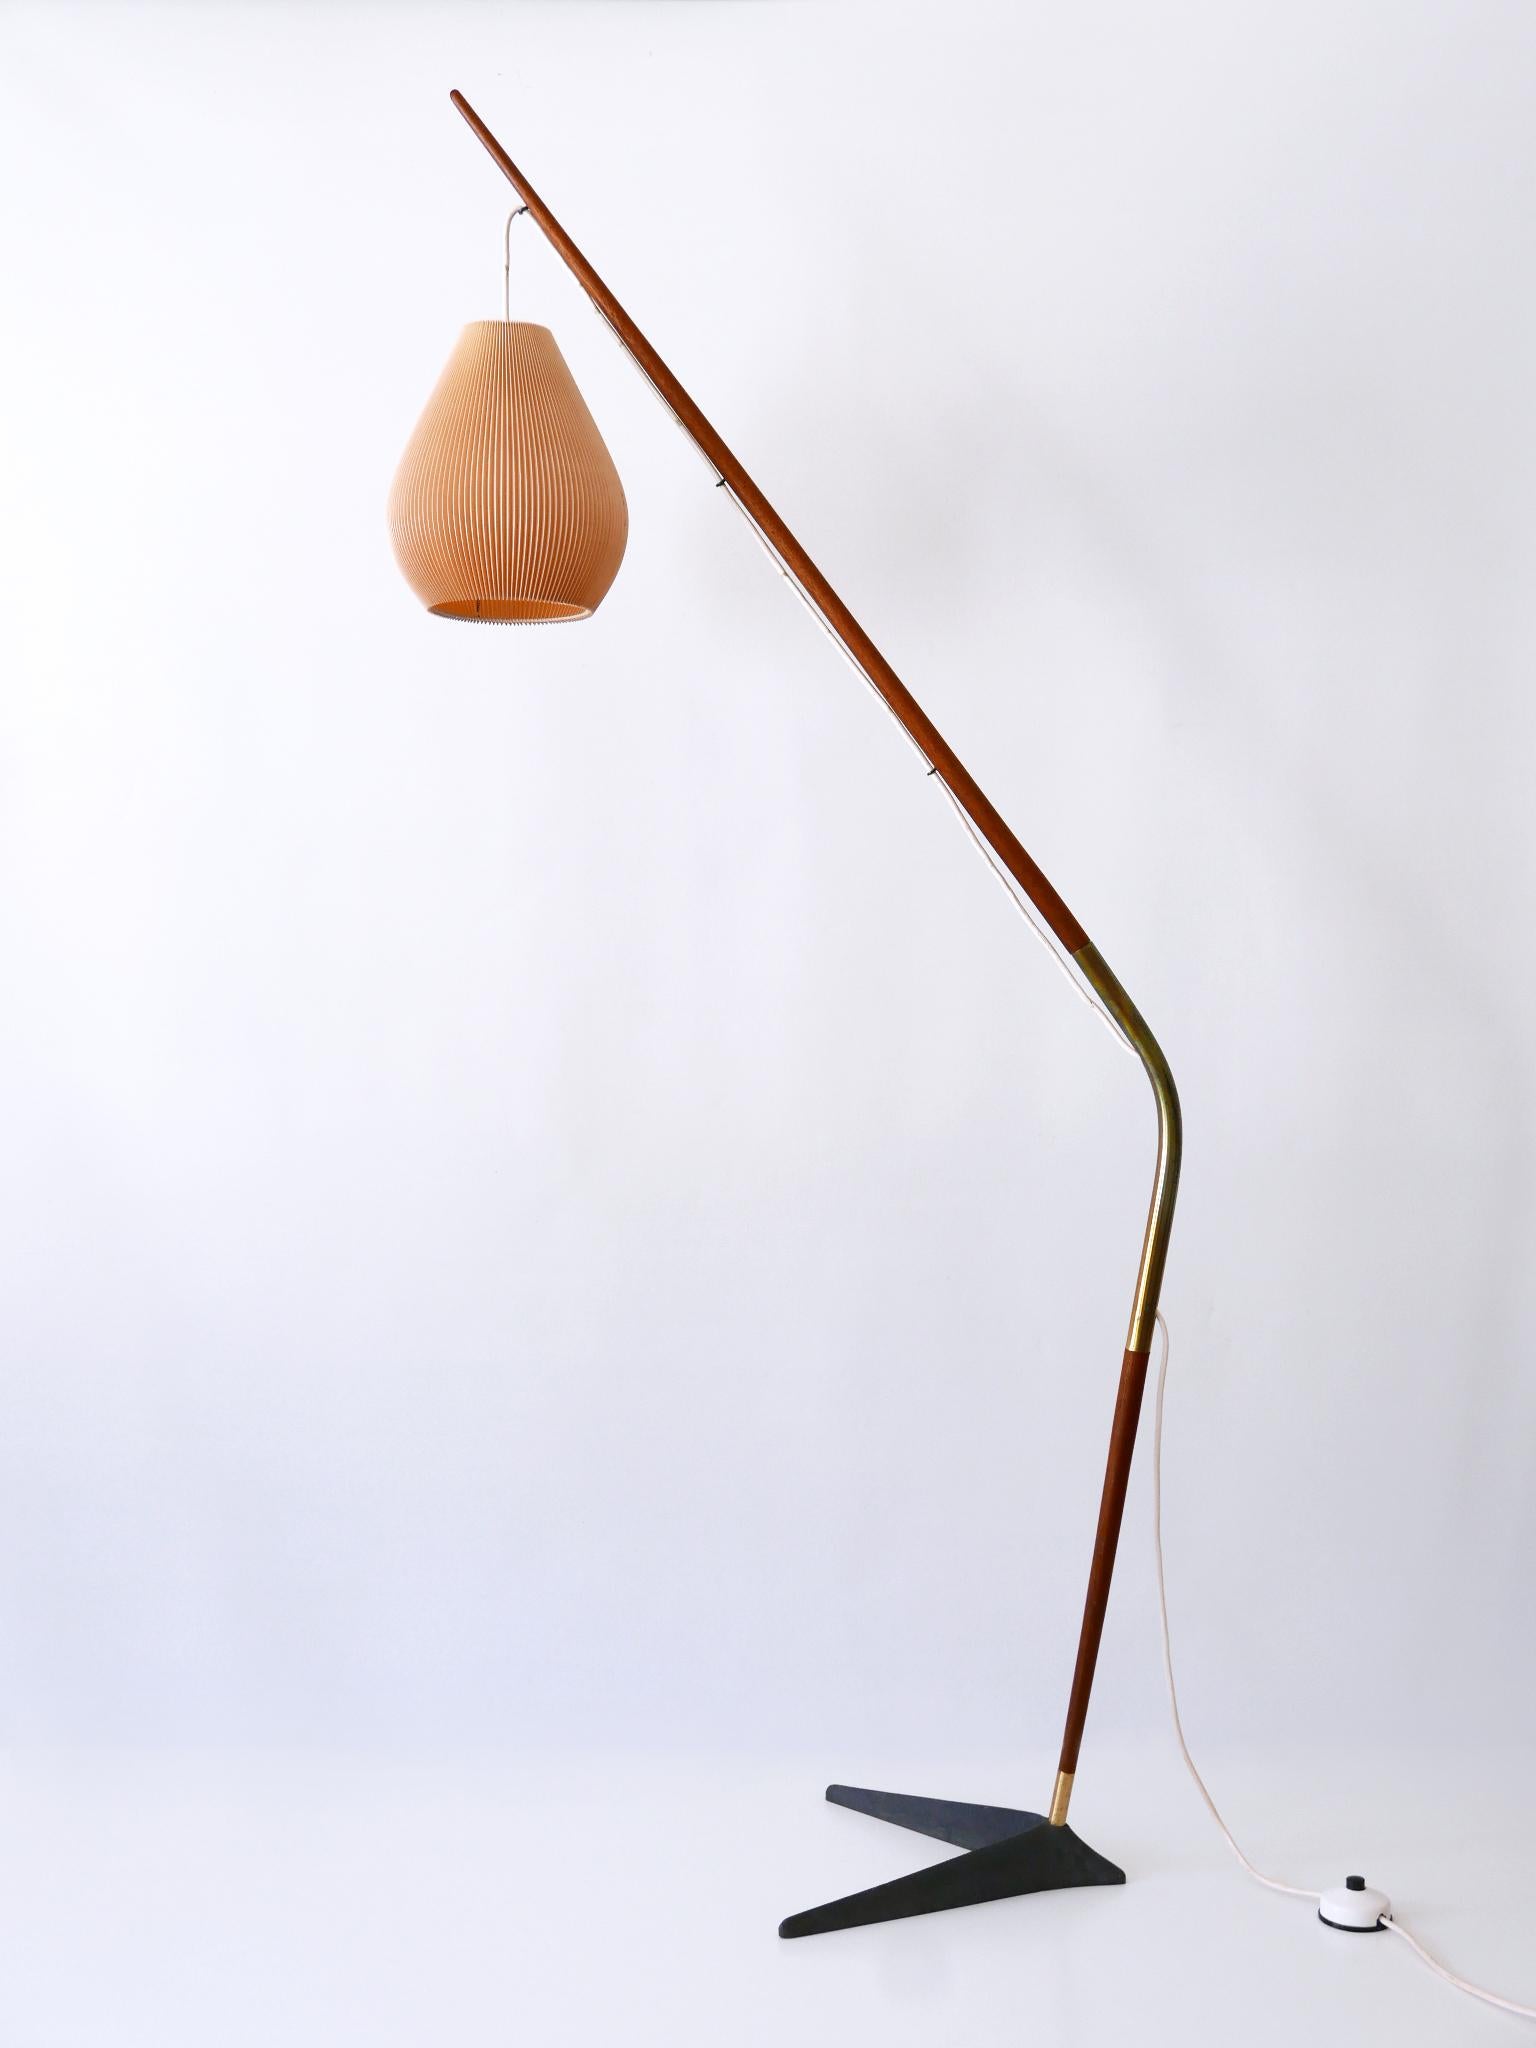 Exceptional 'Fishing Pole' Floor Lamp by Svend Aage Holm Sørensen Denmark 1950s For Sale 2